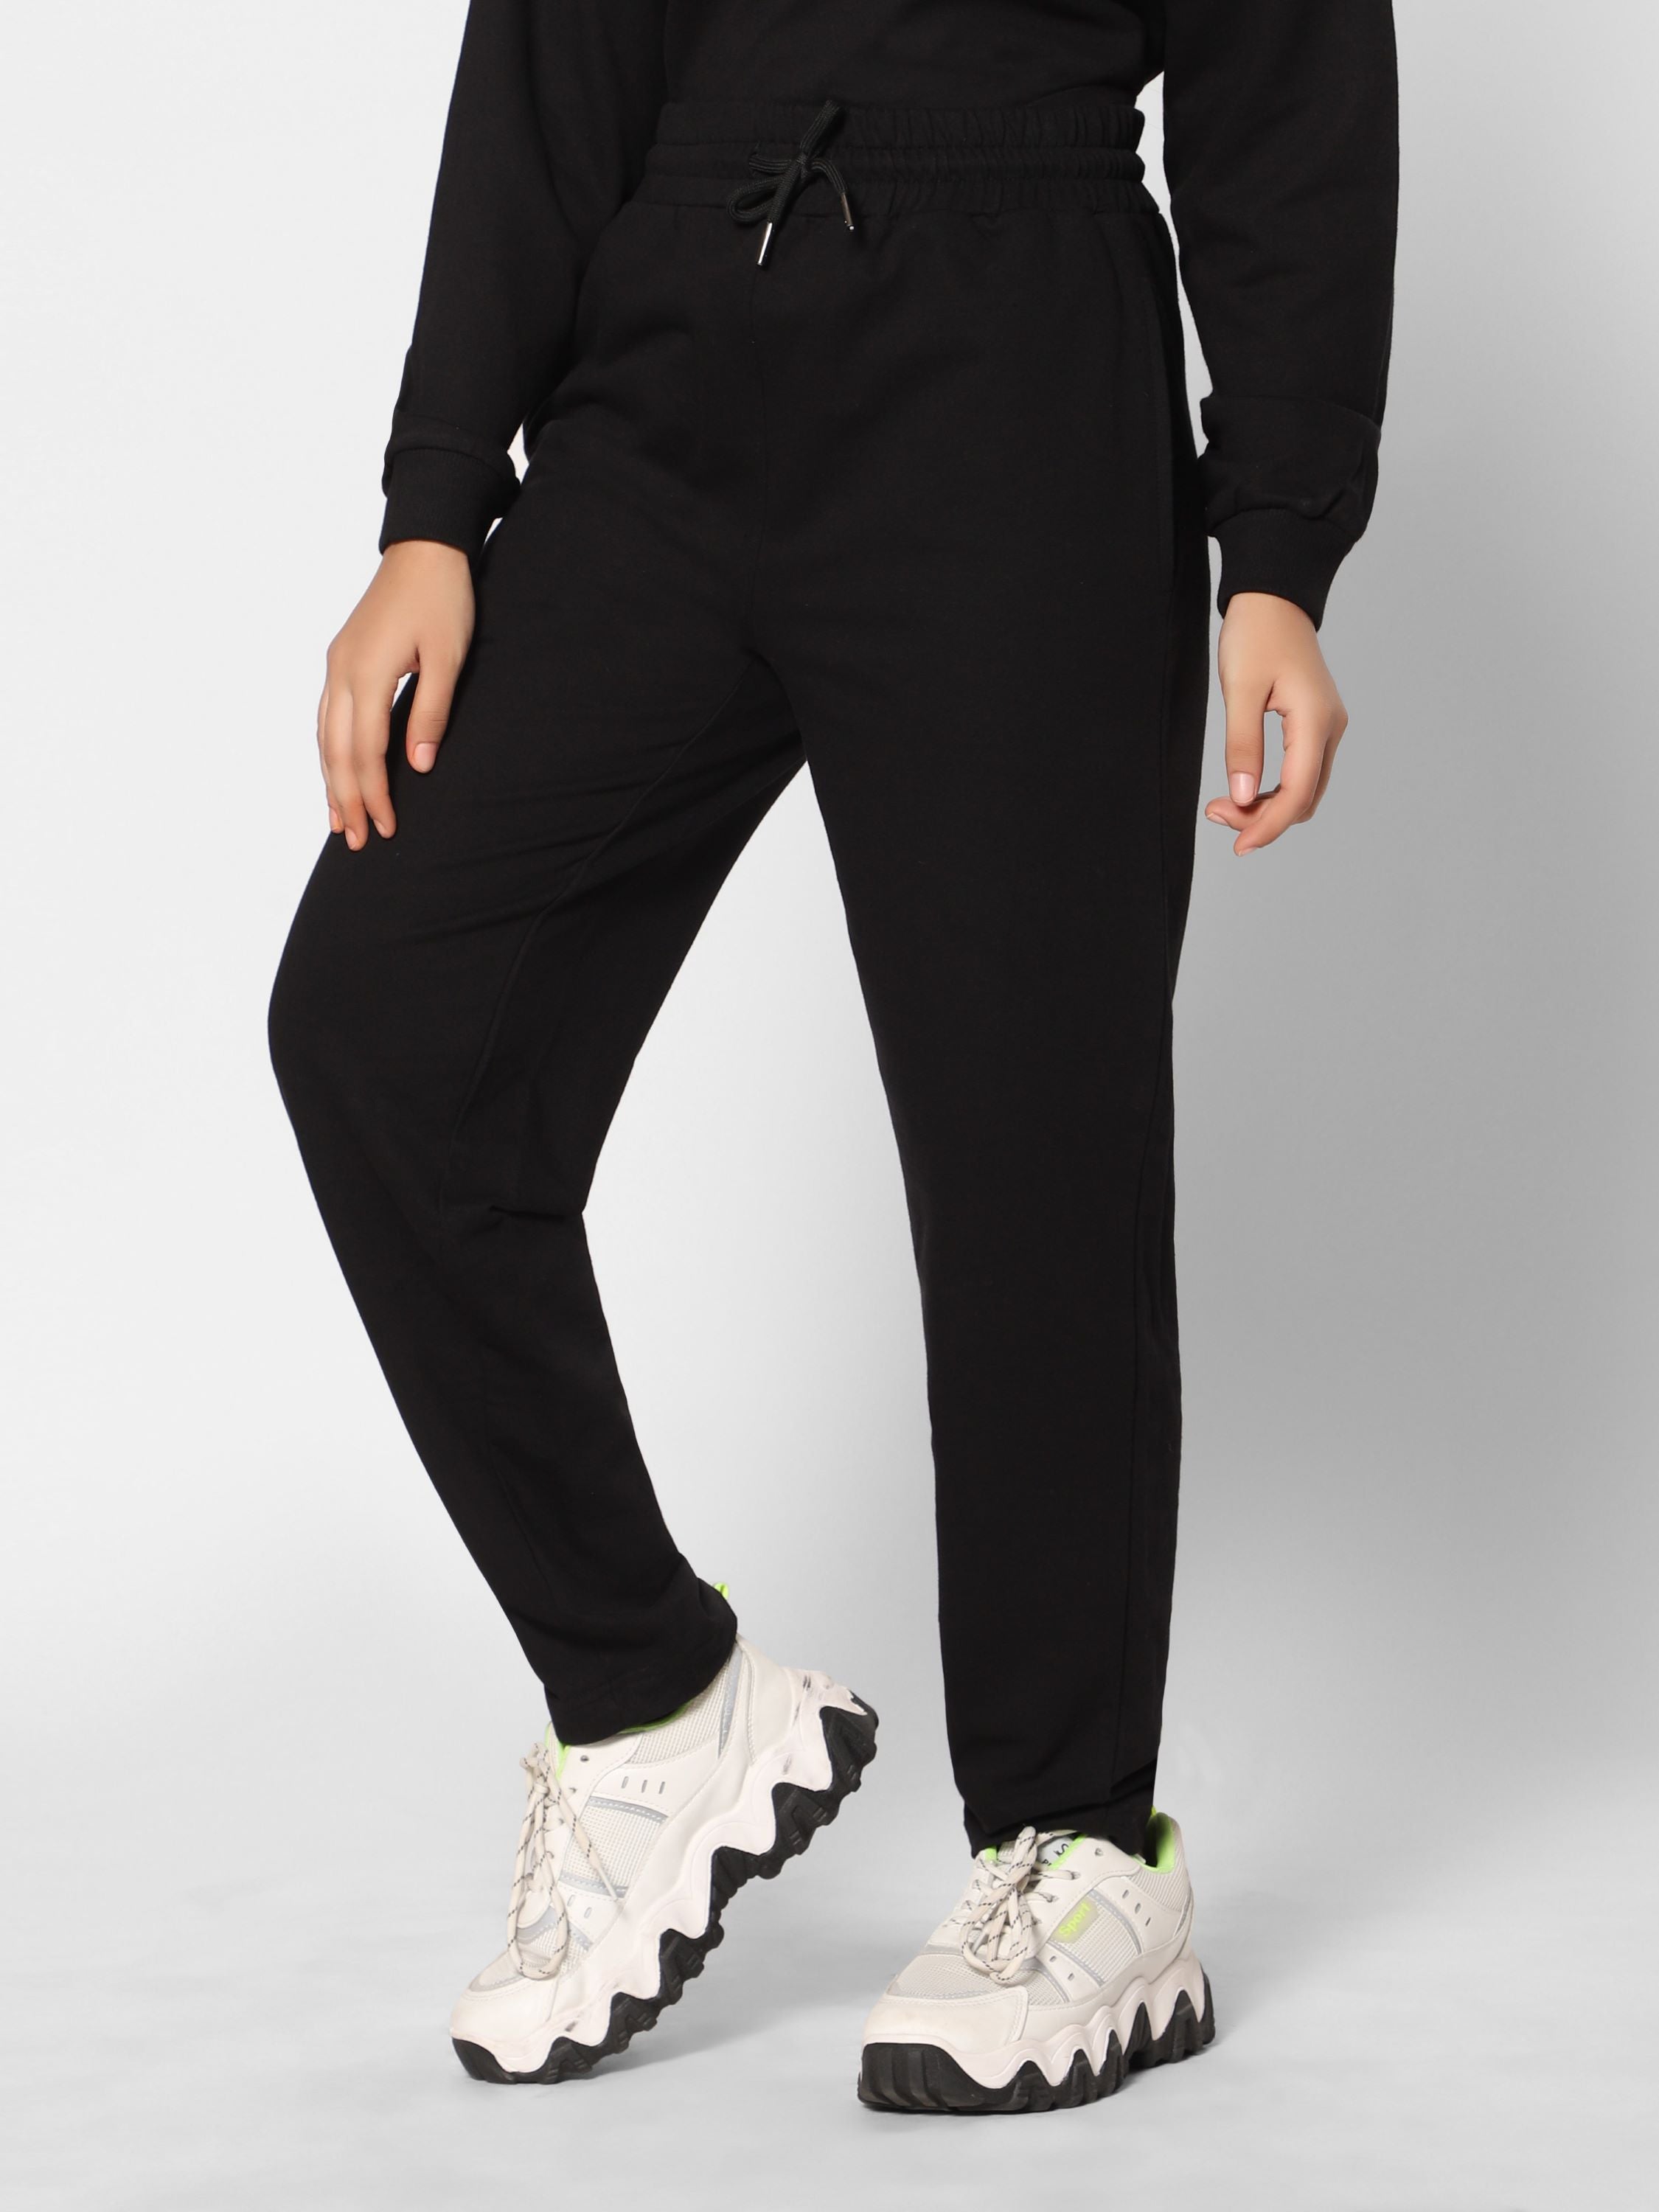 Colorblock Striped Hip Hop Track Pants For Men And Women Loose Fit, Zipper  Closure, Sweat Wicking, Slim Fit Sports Trousers For Men 210715319H From  Zlzol, $66.99 | DHgate.Com